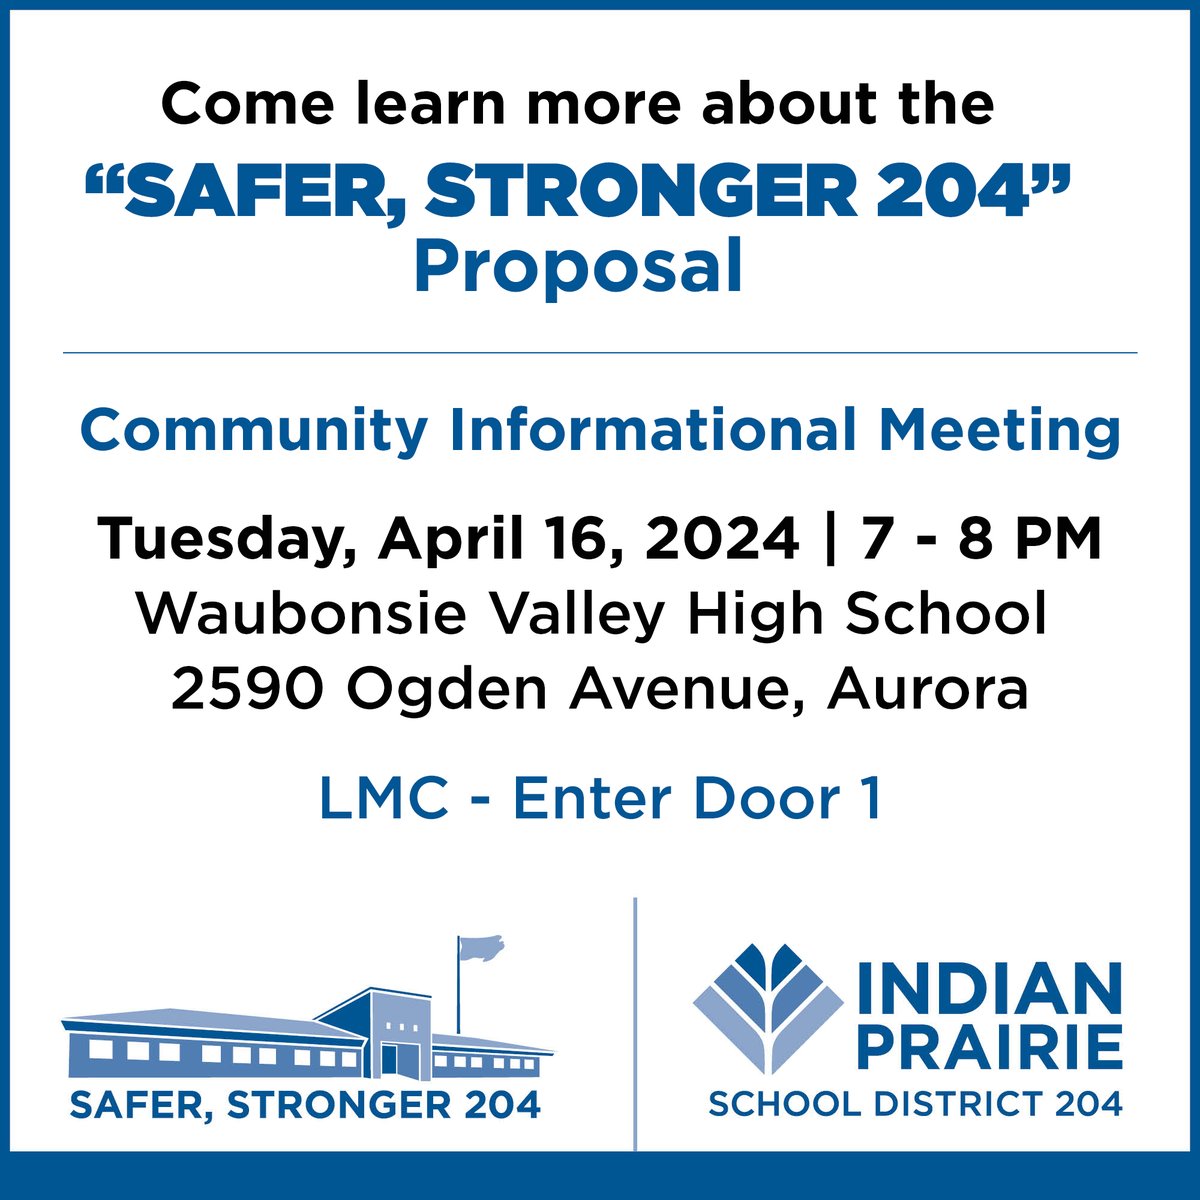 Join us tonight at Waubonsie Valley High School to learn more about the 'Safer, Stronger 204' Proposal! @WaubonsieValley